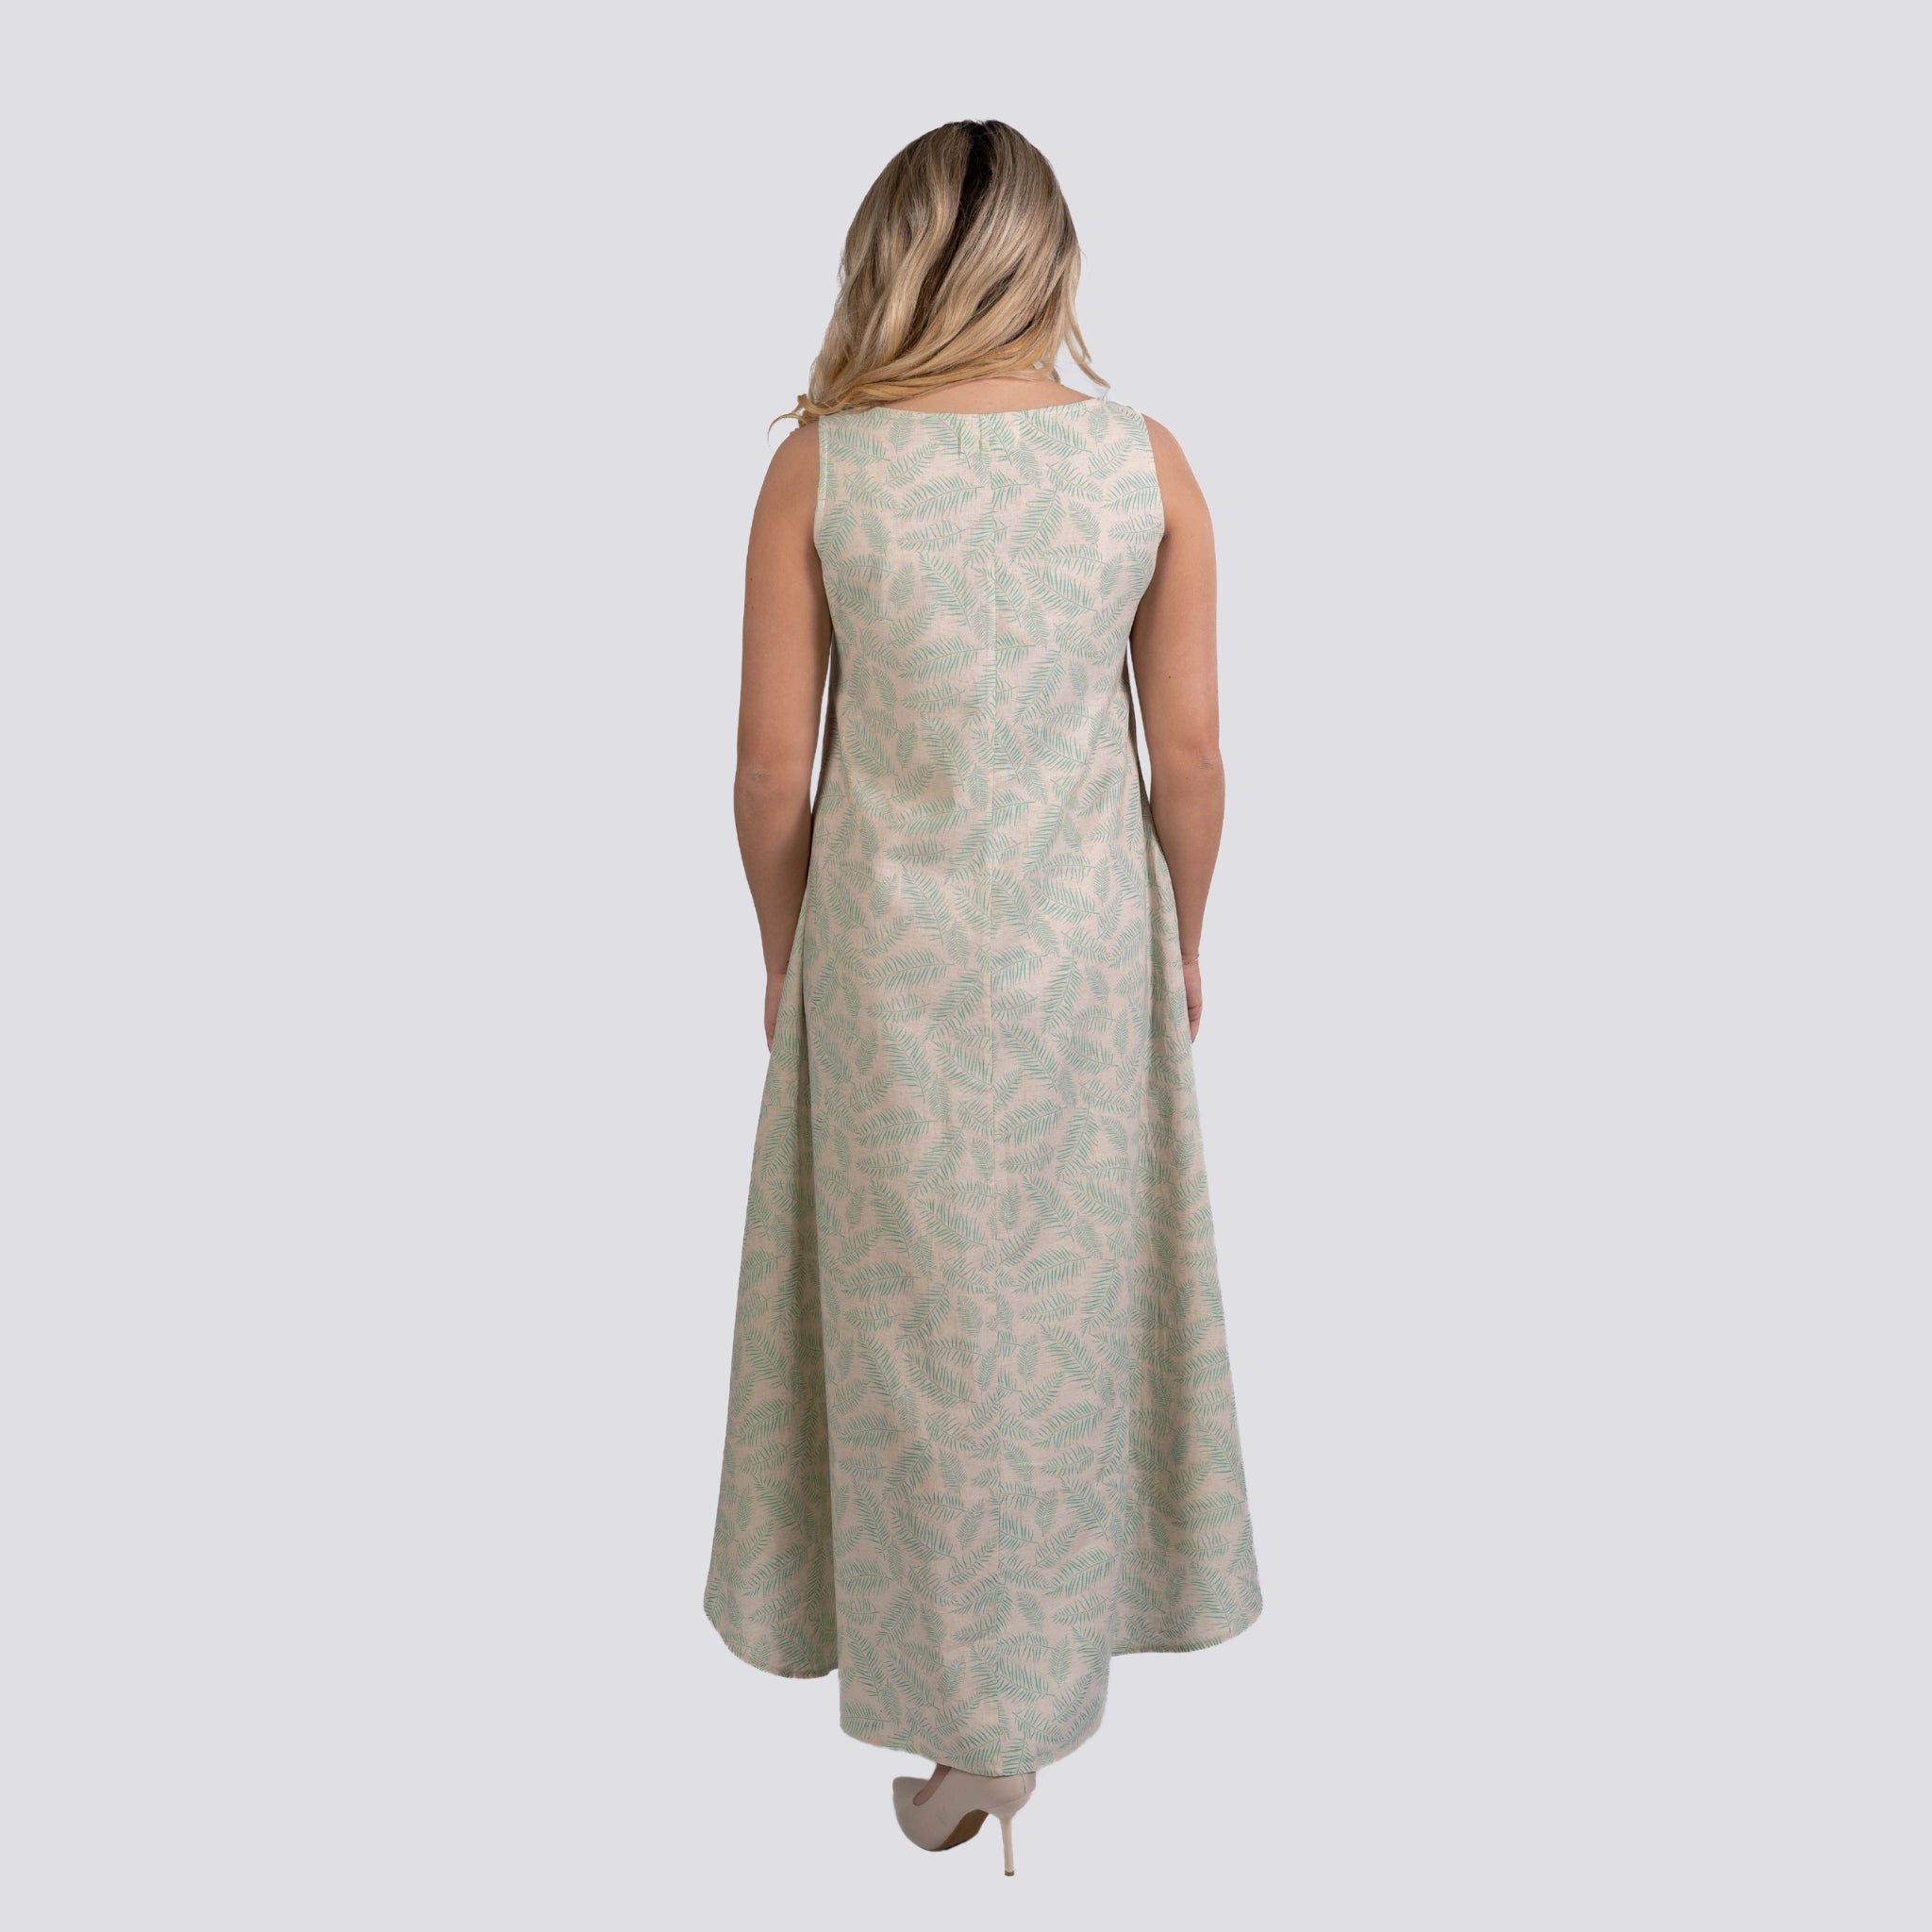 A woman stands with her back to the camera, wearing a long, sleeveless U-neck green dress with a leaf pattern, on a plain white background. 
Product Name: Karee Mystic Breeze High Low Linen Cotton Midi Dress